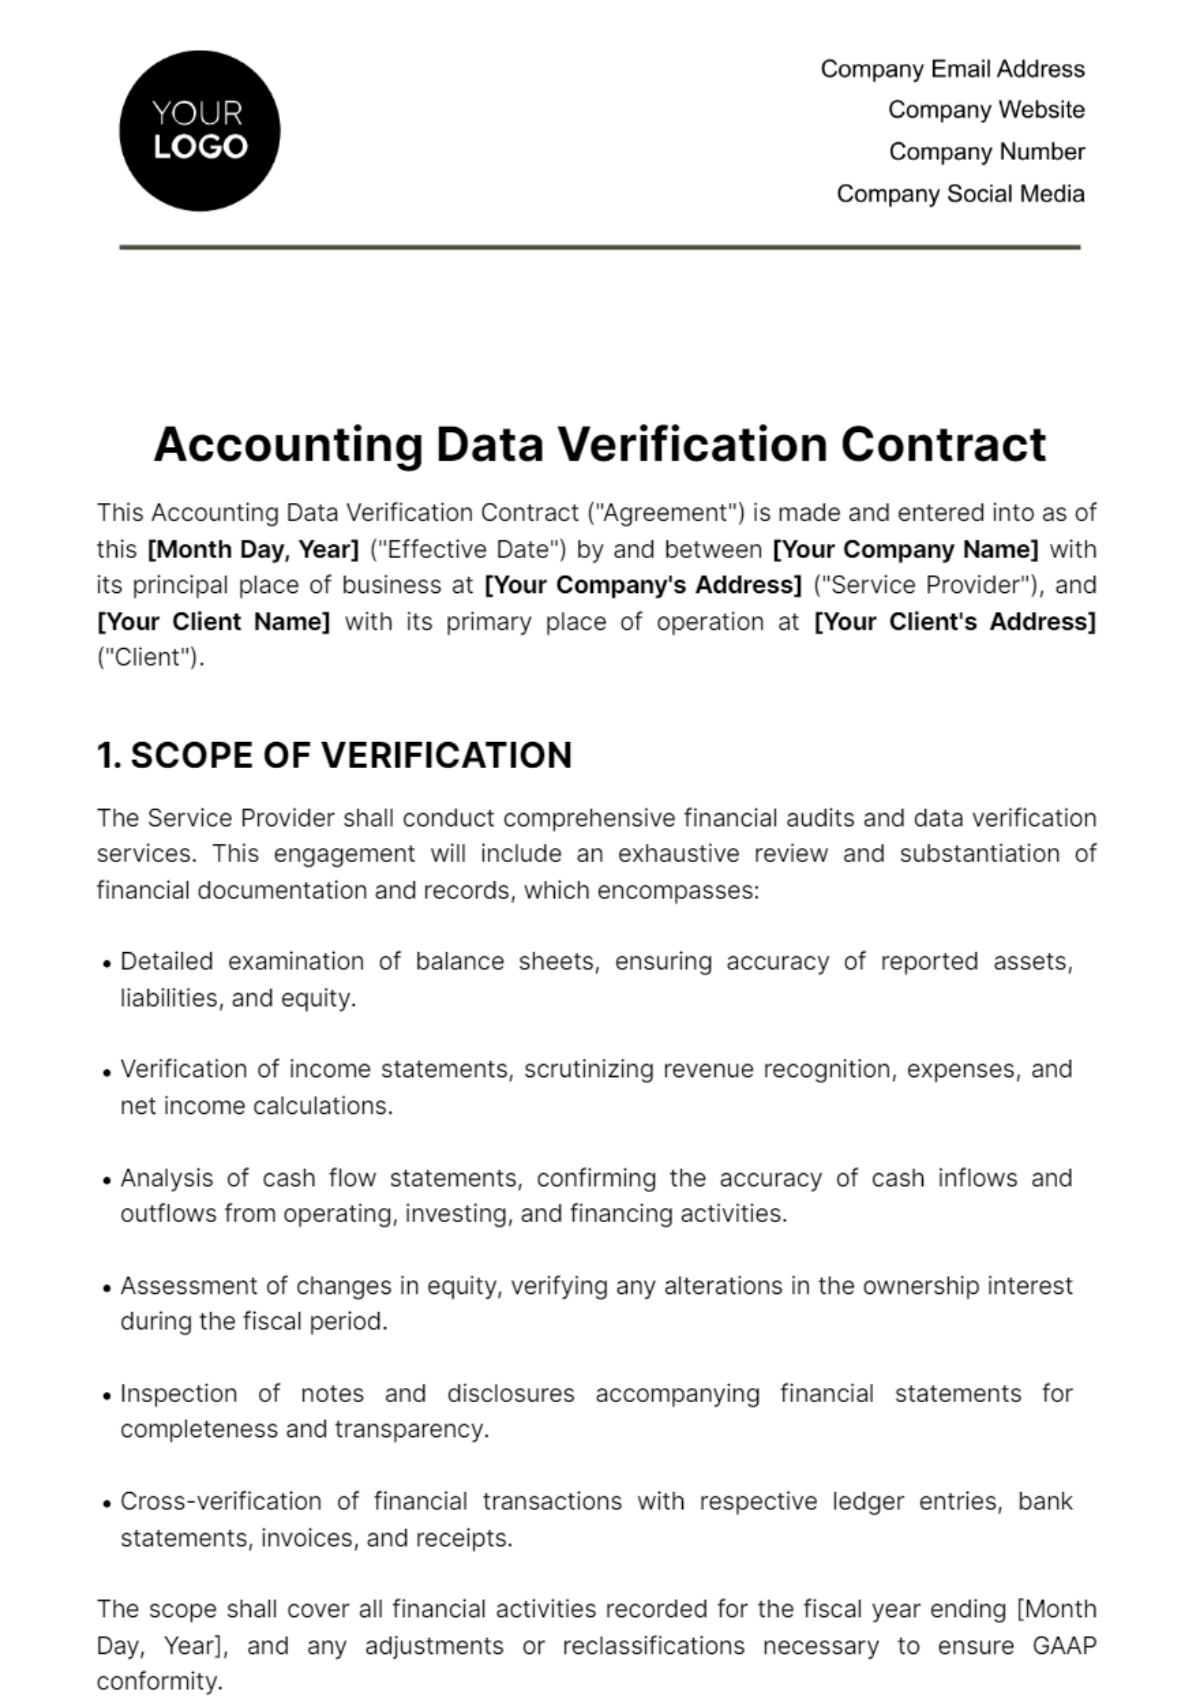 Accounting Data Verification Contract Template